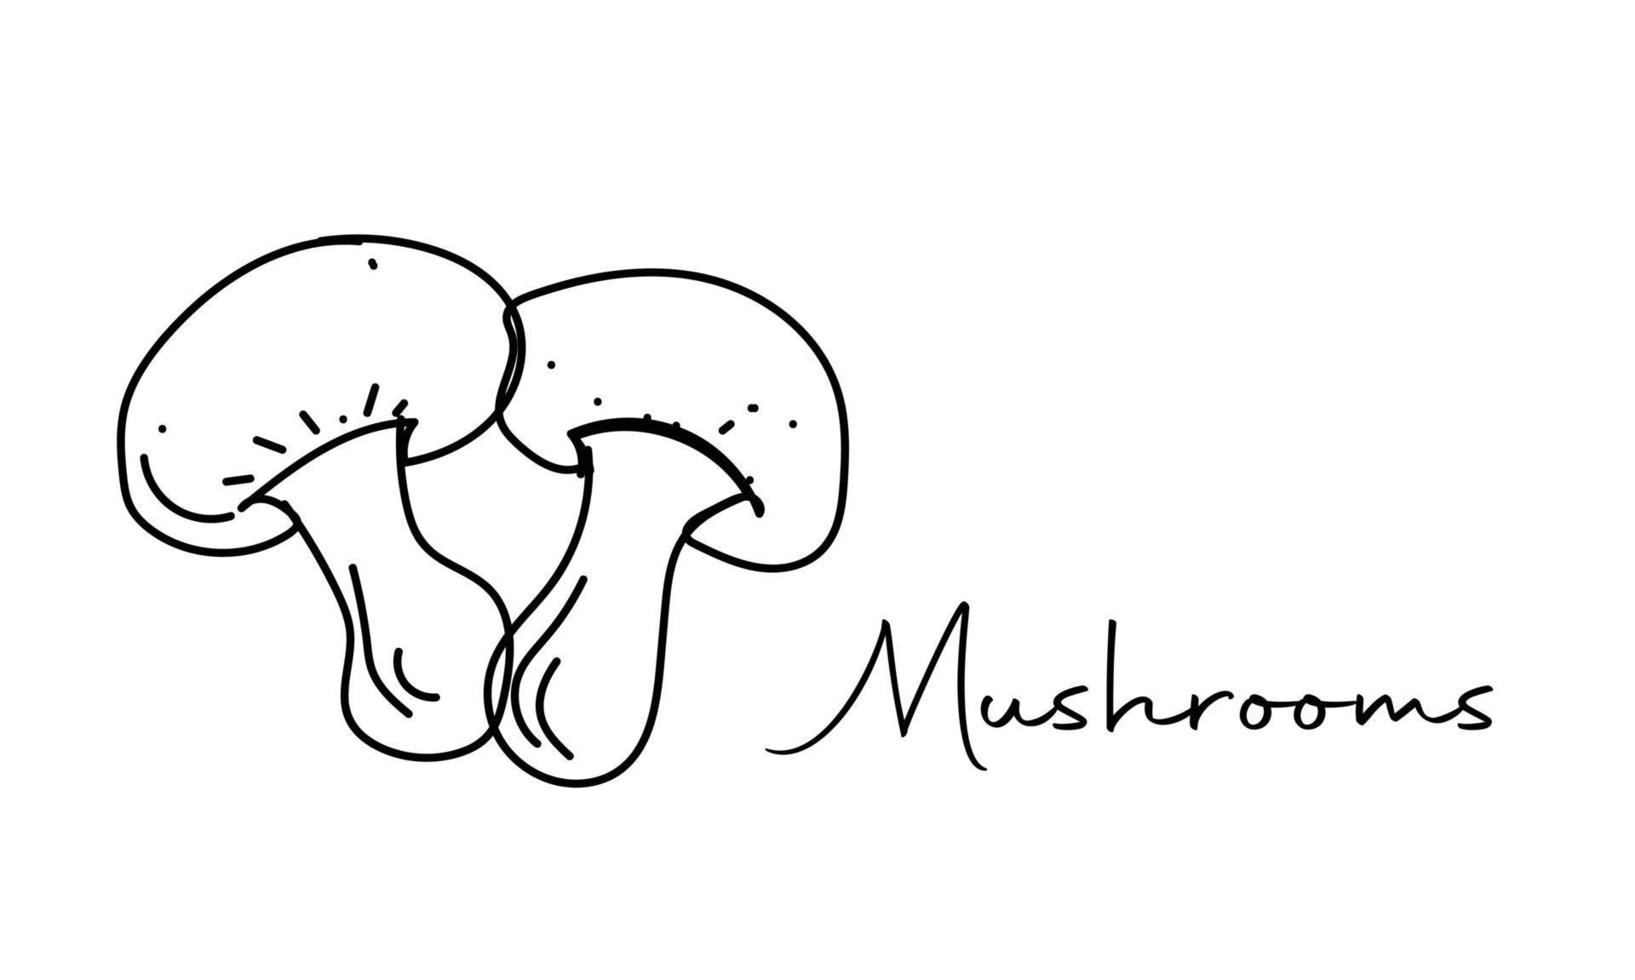 Hand drawn mushroom doodle vector illustration isolated on white background. Can be used for magazine, book, poster, card, menu cover, web pages.